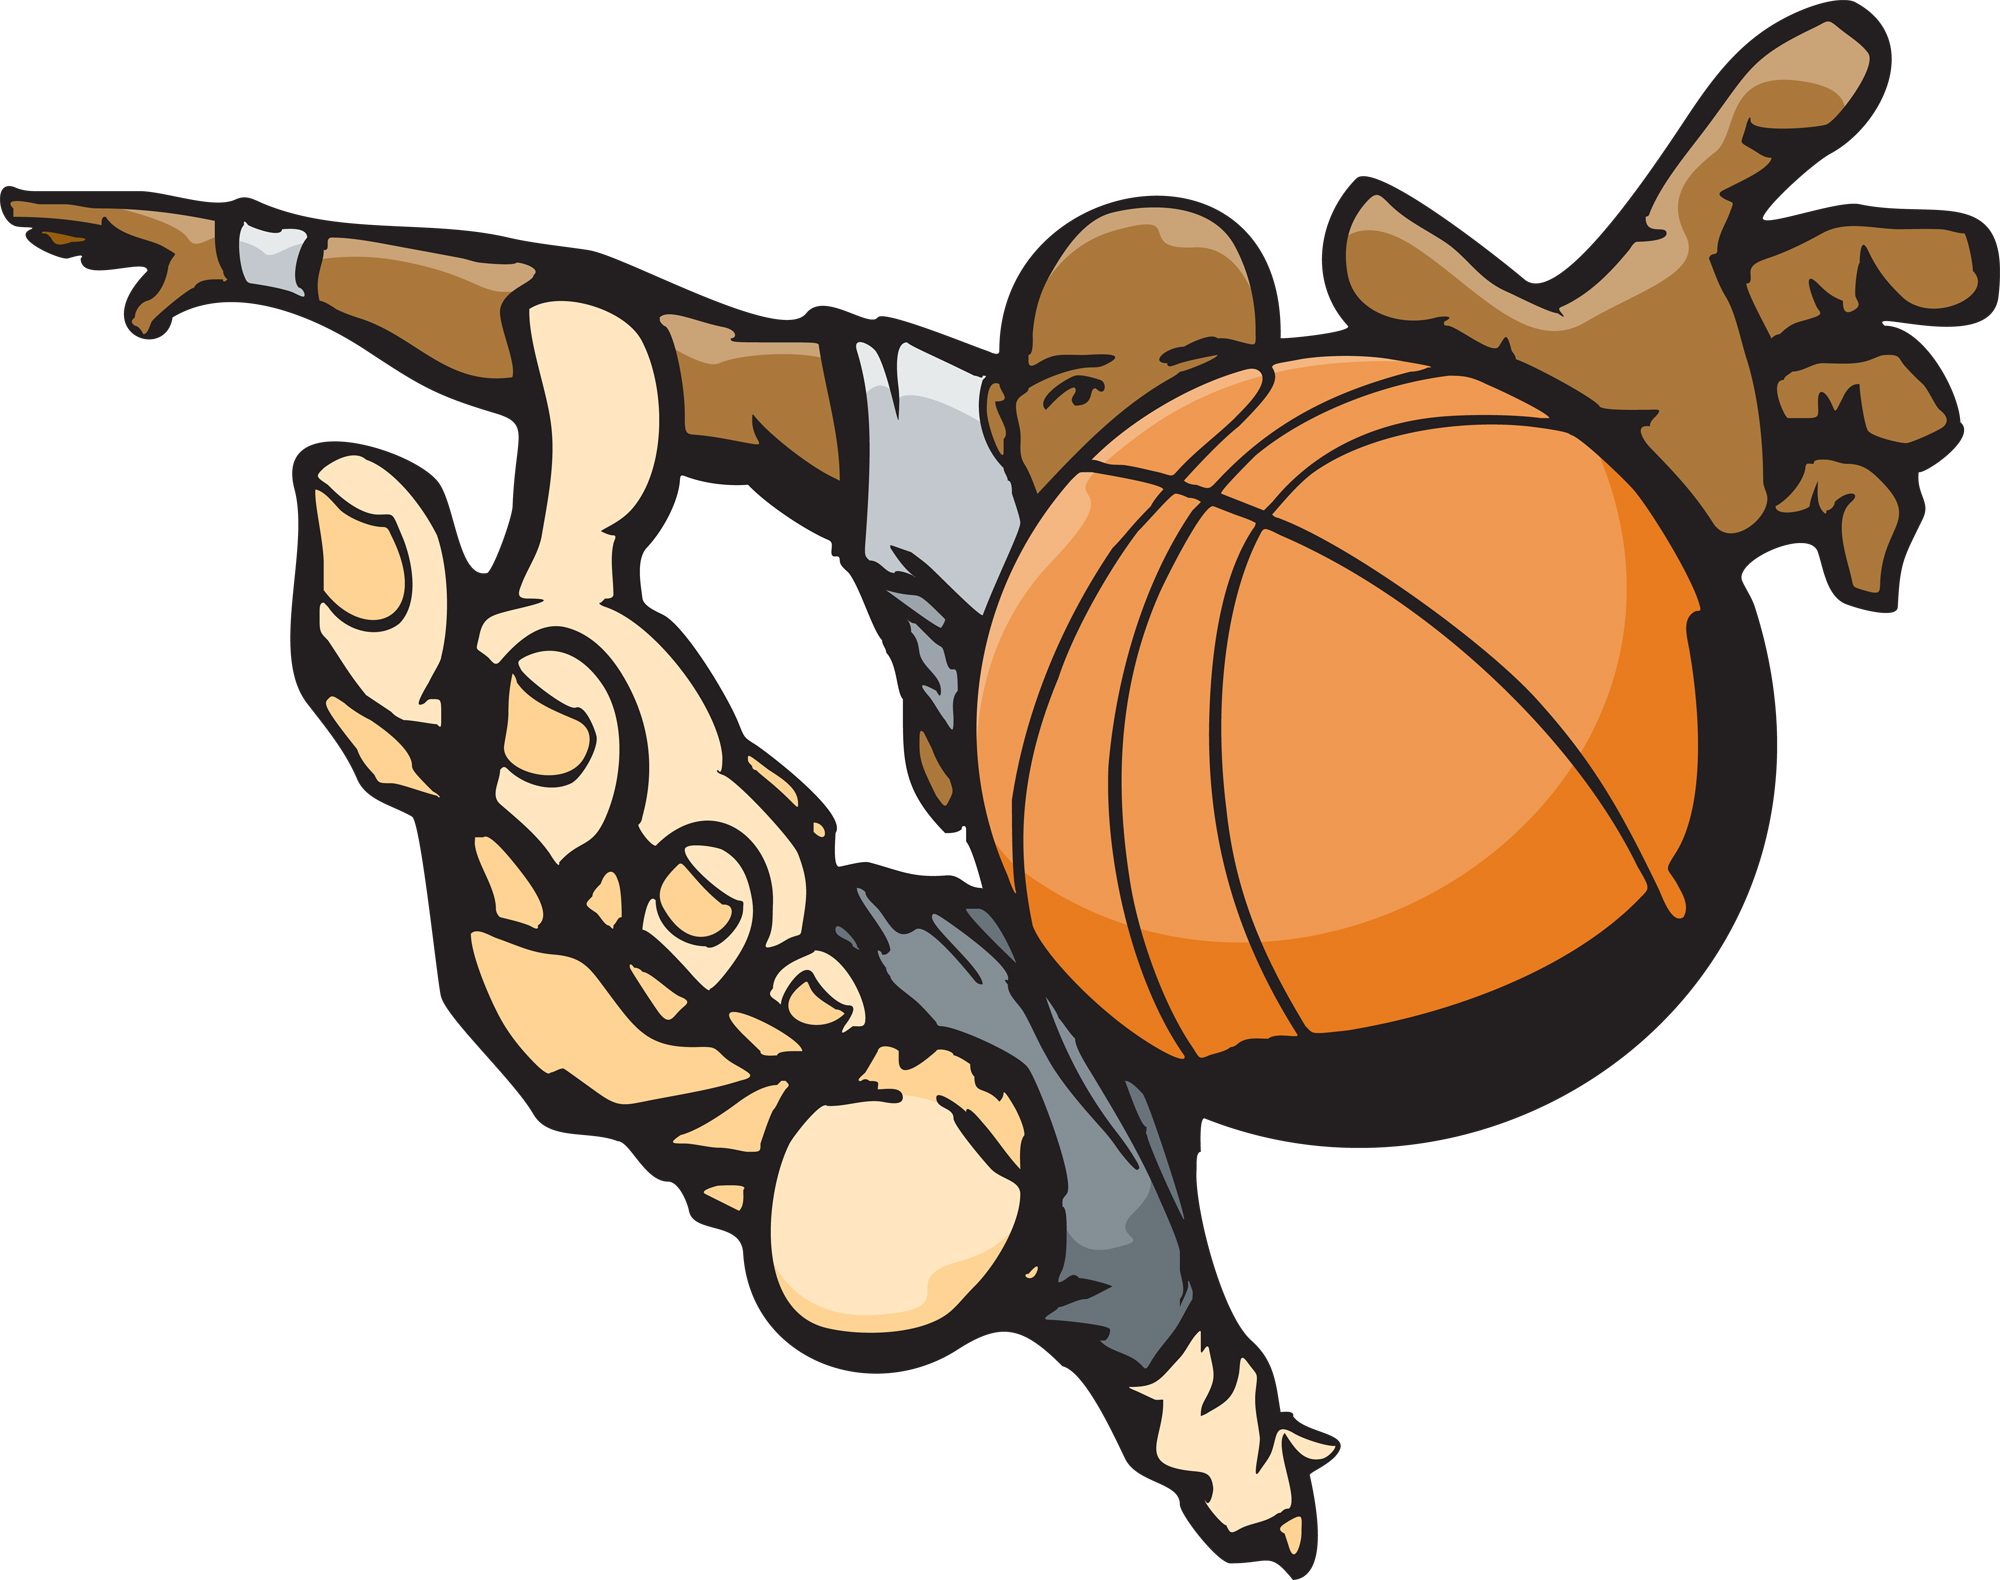 Clipart For Basketball - Cliparts.co